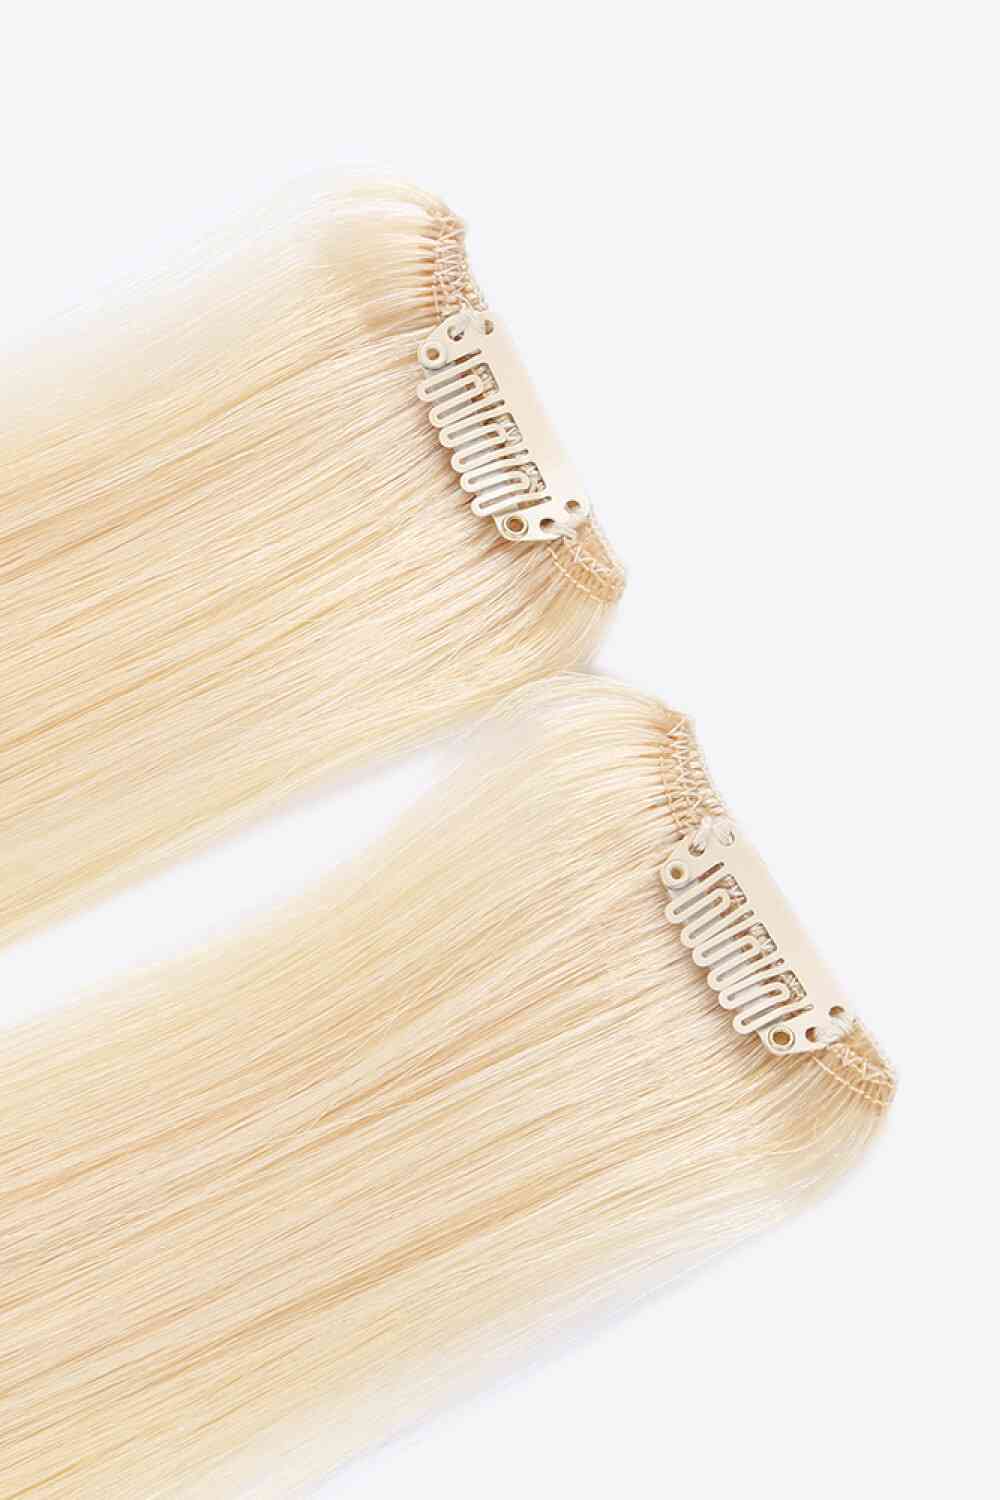 20" 120g Clip-in Hair Extensions Indian Human Hair in Blonde   